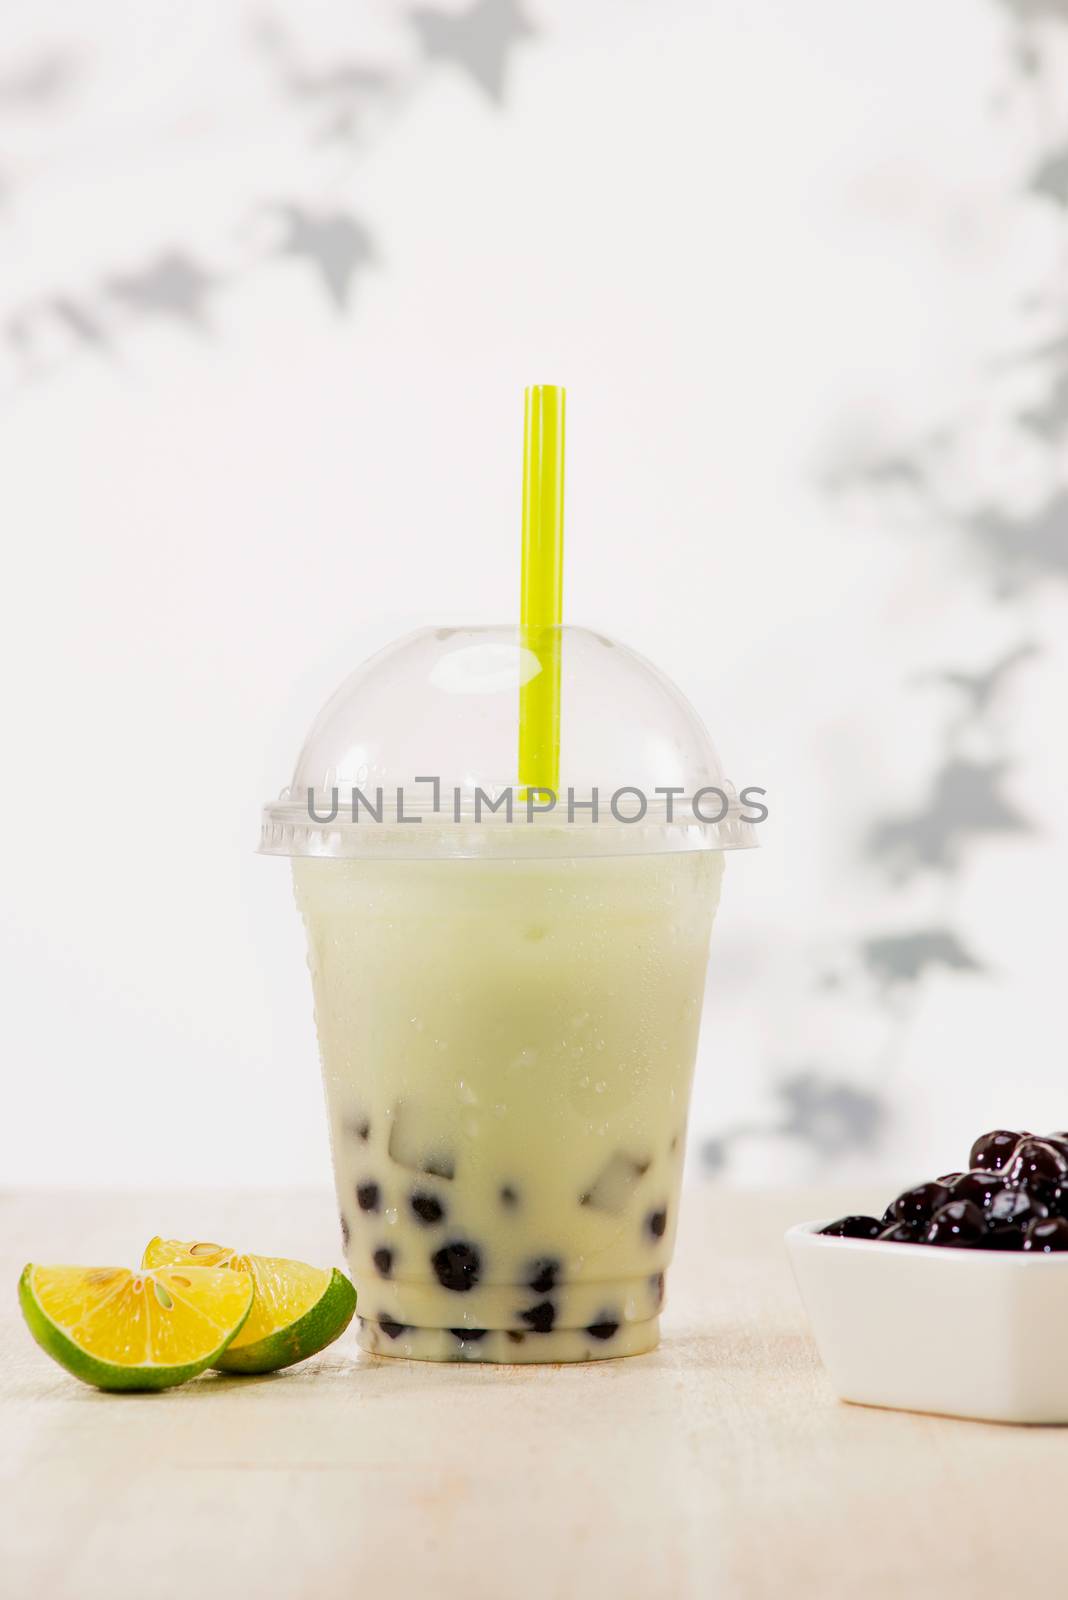 Lemon bubble boba tea with milk and tapioca pearls in plastic cu by makidotvn